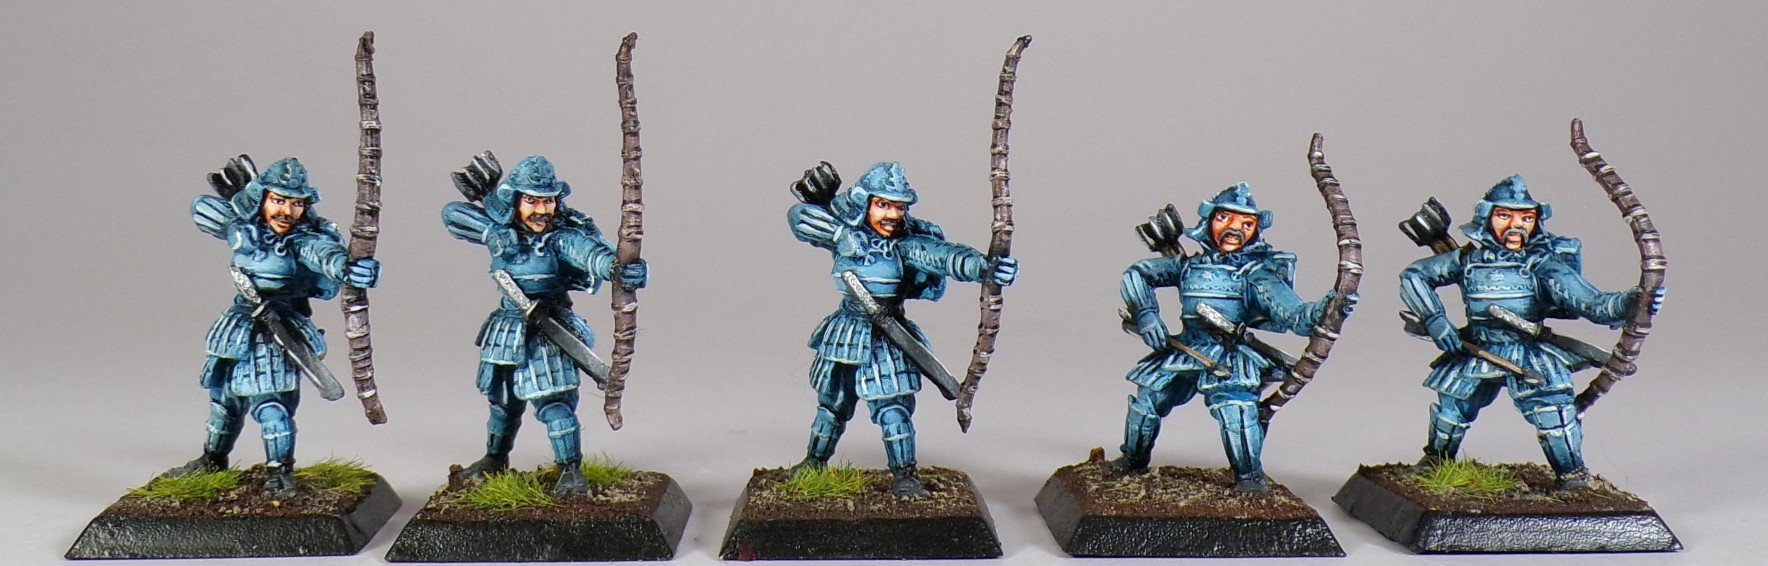 L5R Legend of the Five Rings Miniature Painting Service Paintedfigs (6).jpg